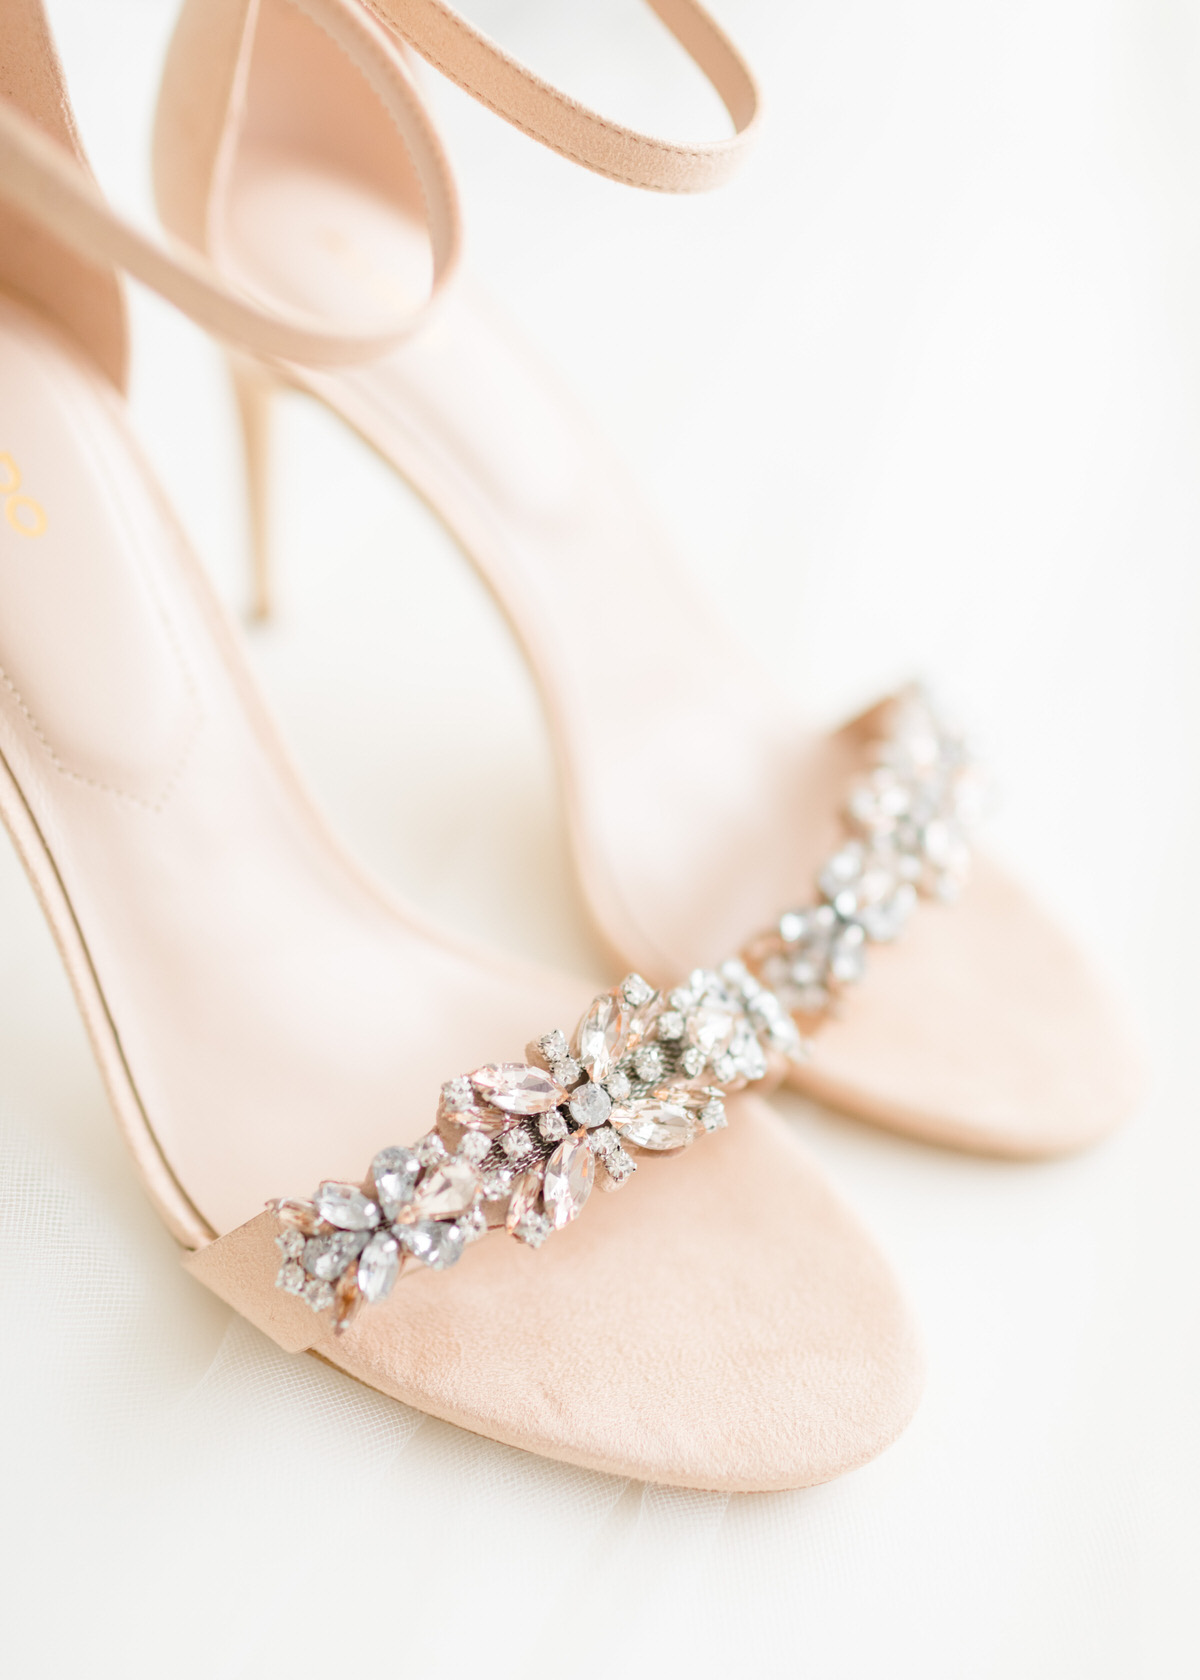 Bejewelled wedding shoes, sparkly wedding shoes, blush wedding shoes, blush wedding heels, sparkly blush wedding shoes, wedding details, elegant wedding shoes